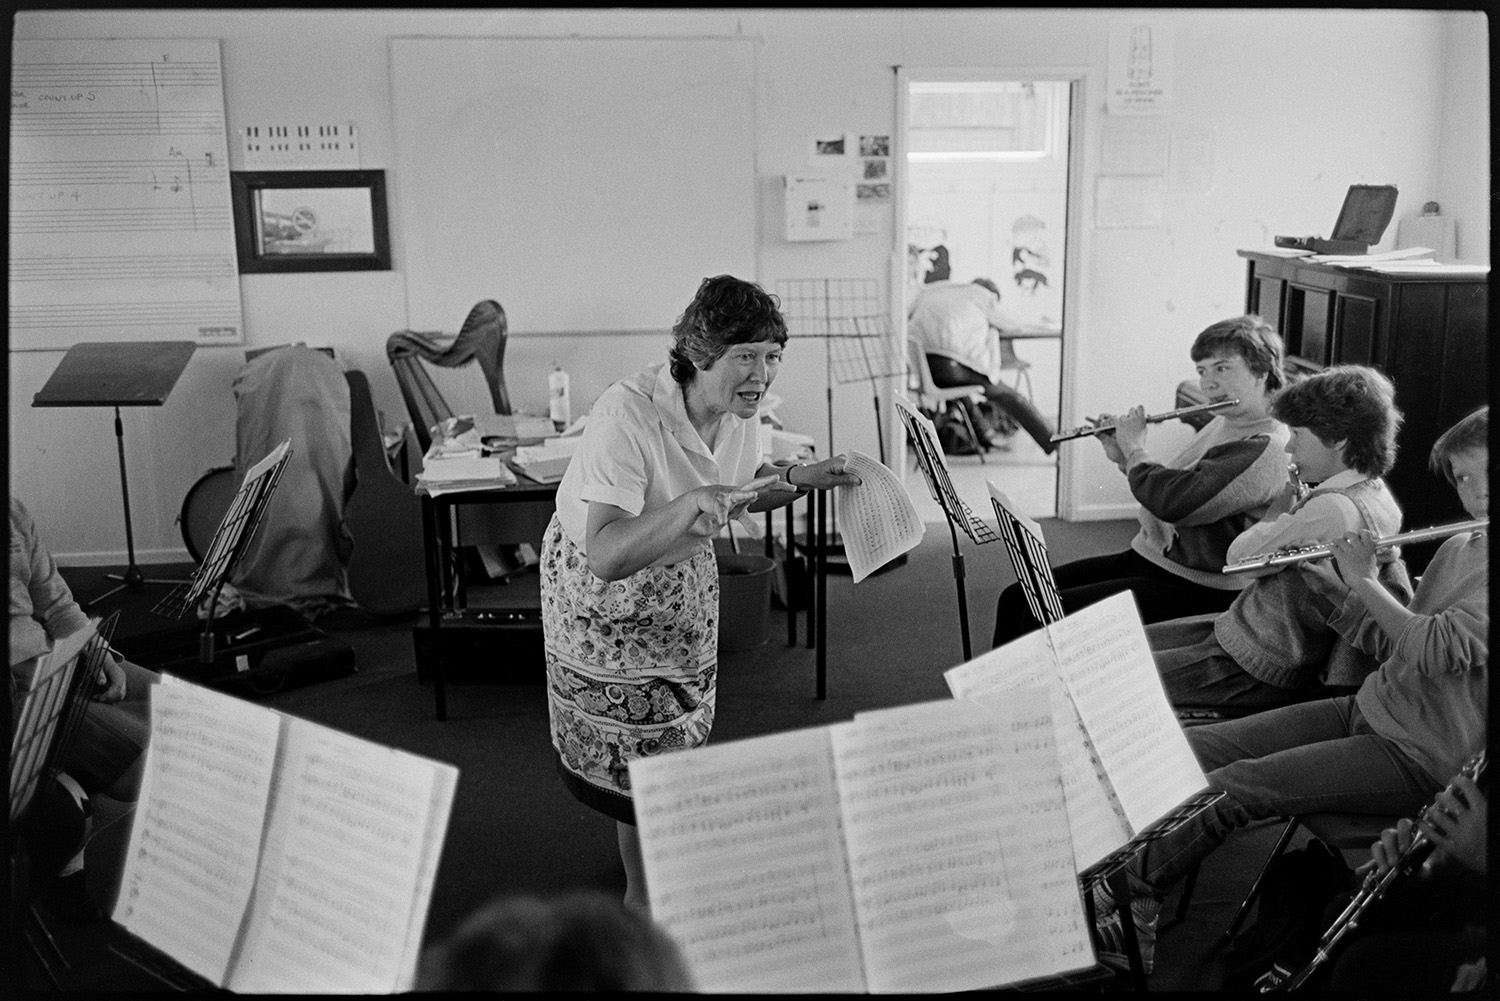 Music class in school, visiting teacher with staff and pupils playing music and advising. 
[A woman teaching a music lesson or orchestra in Holsworthy School to pupils playing flutes and clarinets. A harp can be seen behind the desk in the background.]